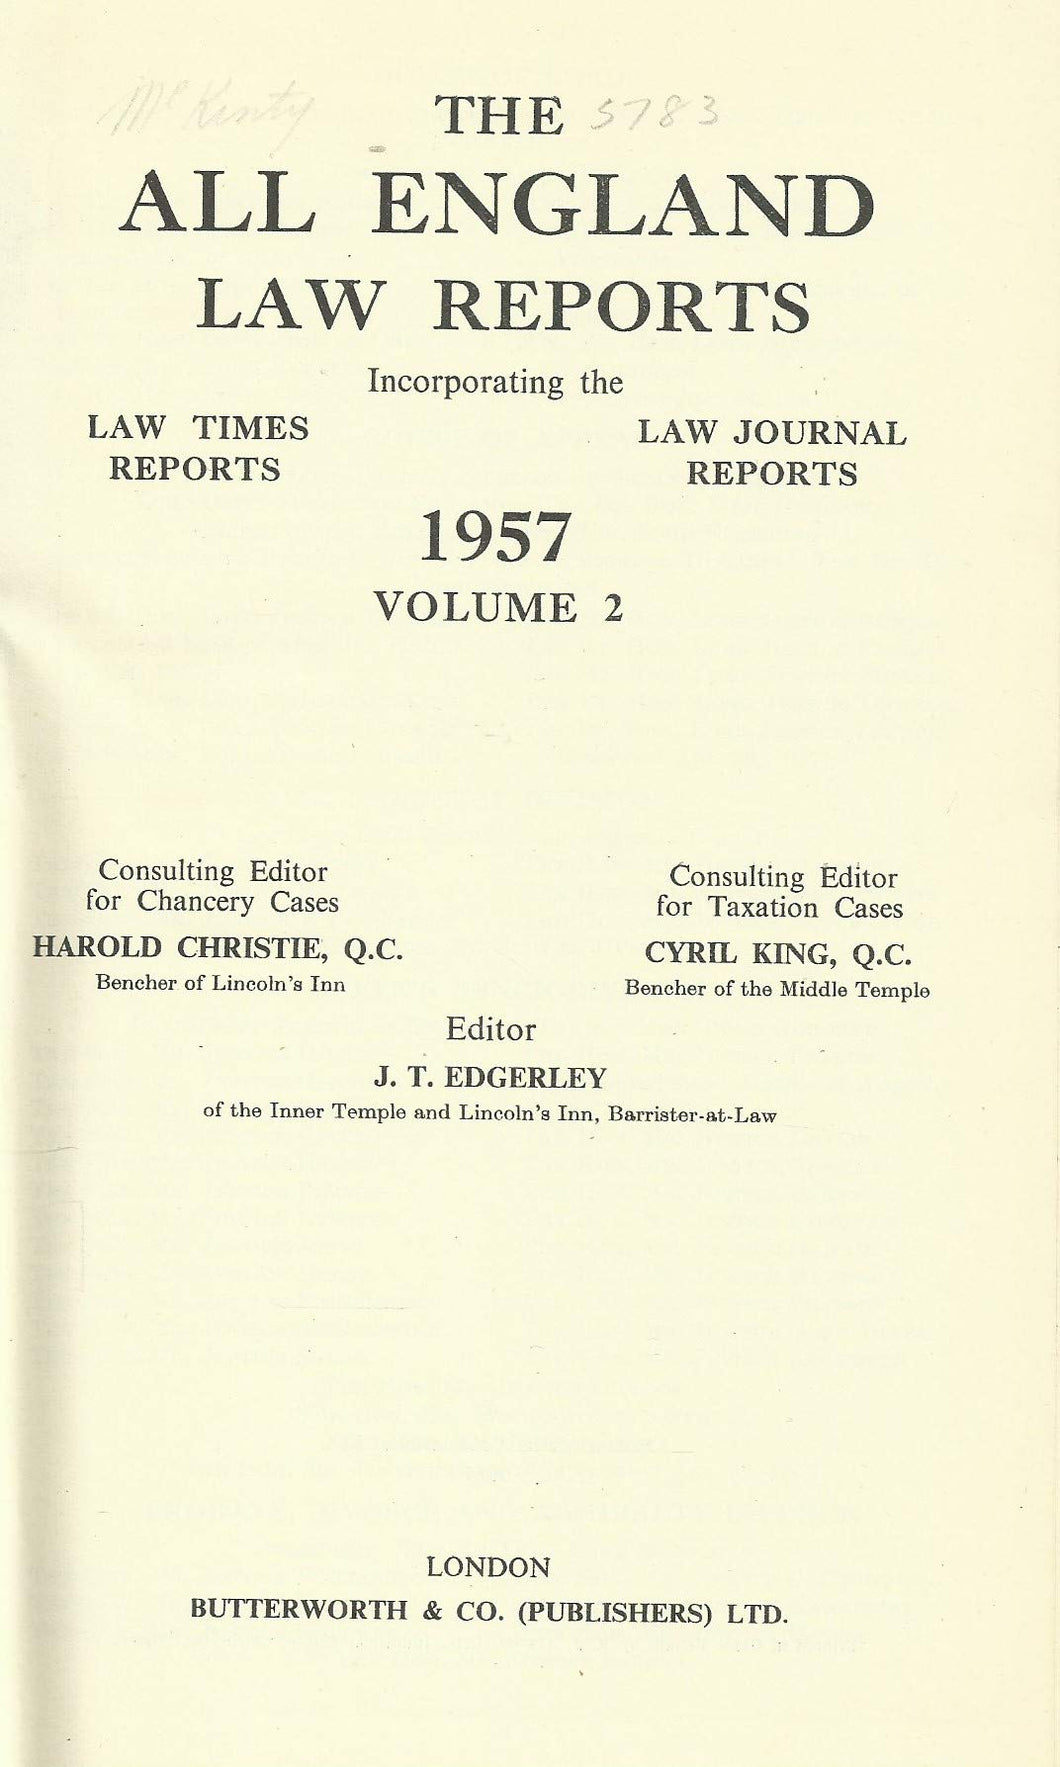 The All England Law Reports: 1957 Vol 2